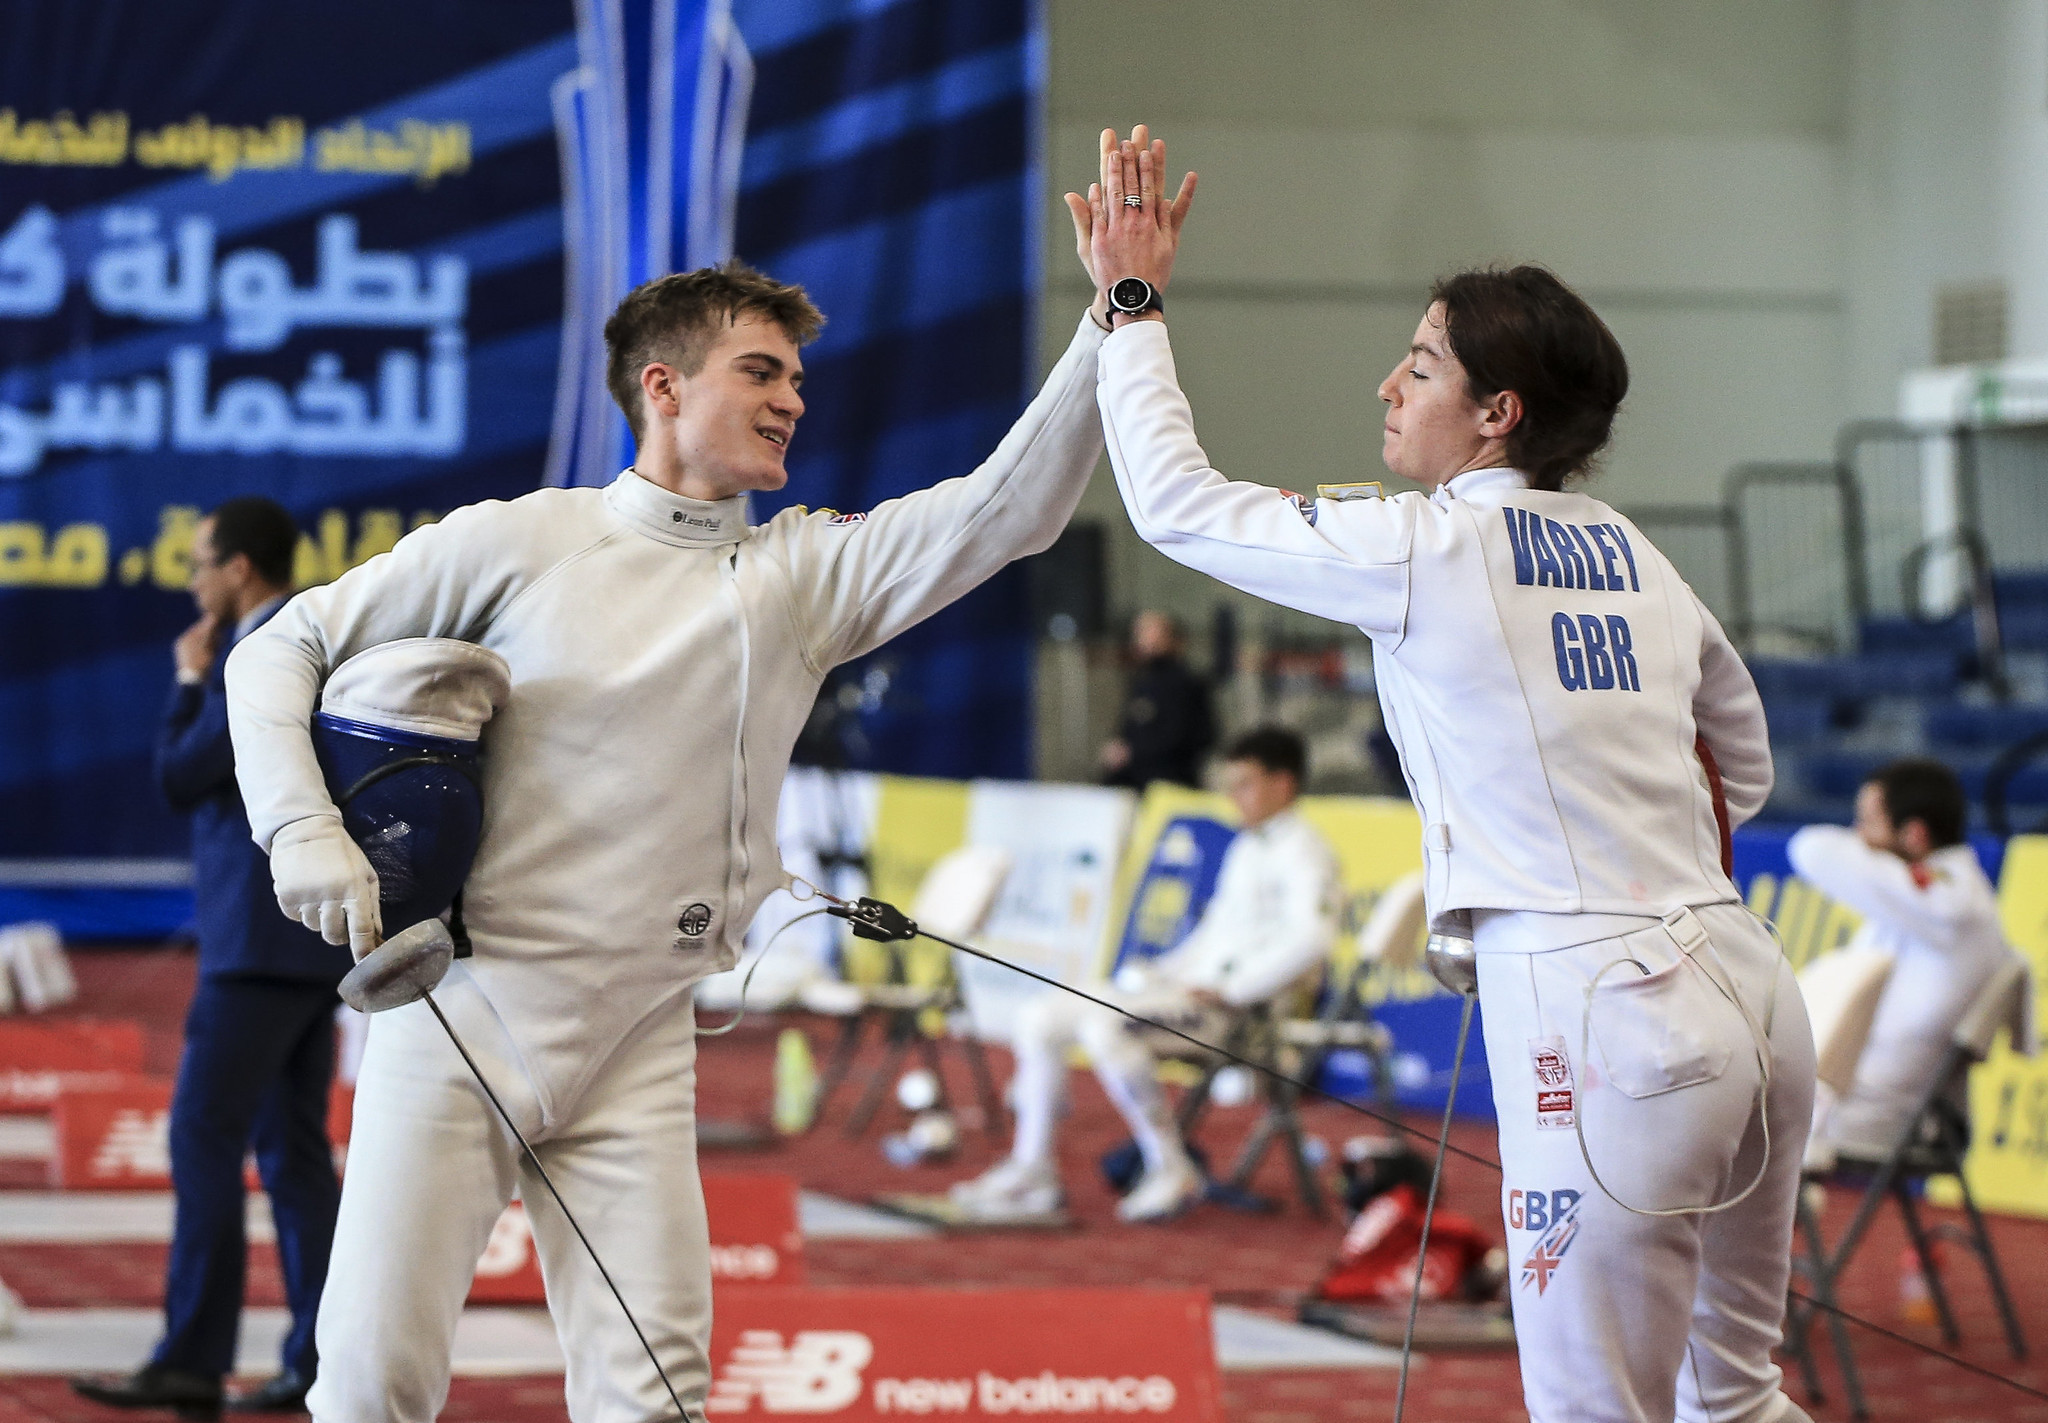 Britain's Ross Charlton and Jessica Varley finished as the runners-up in Cairo ©UIPM